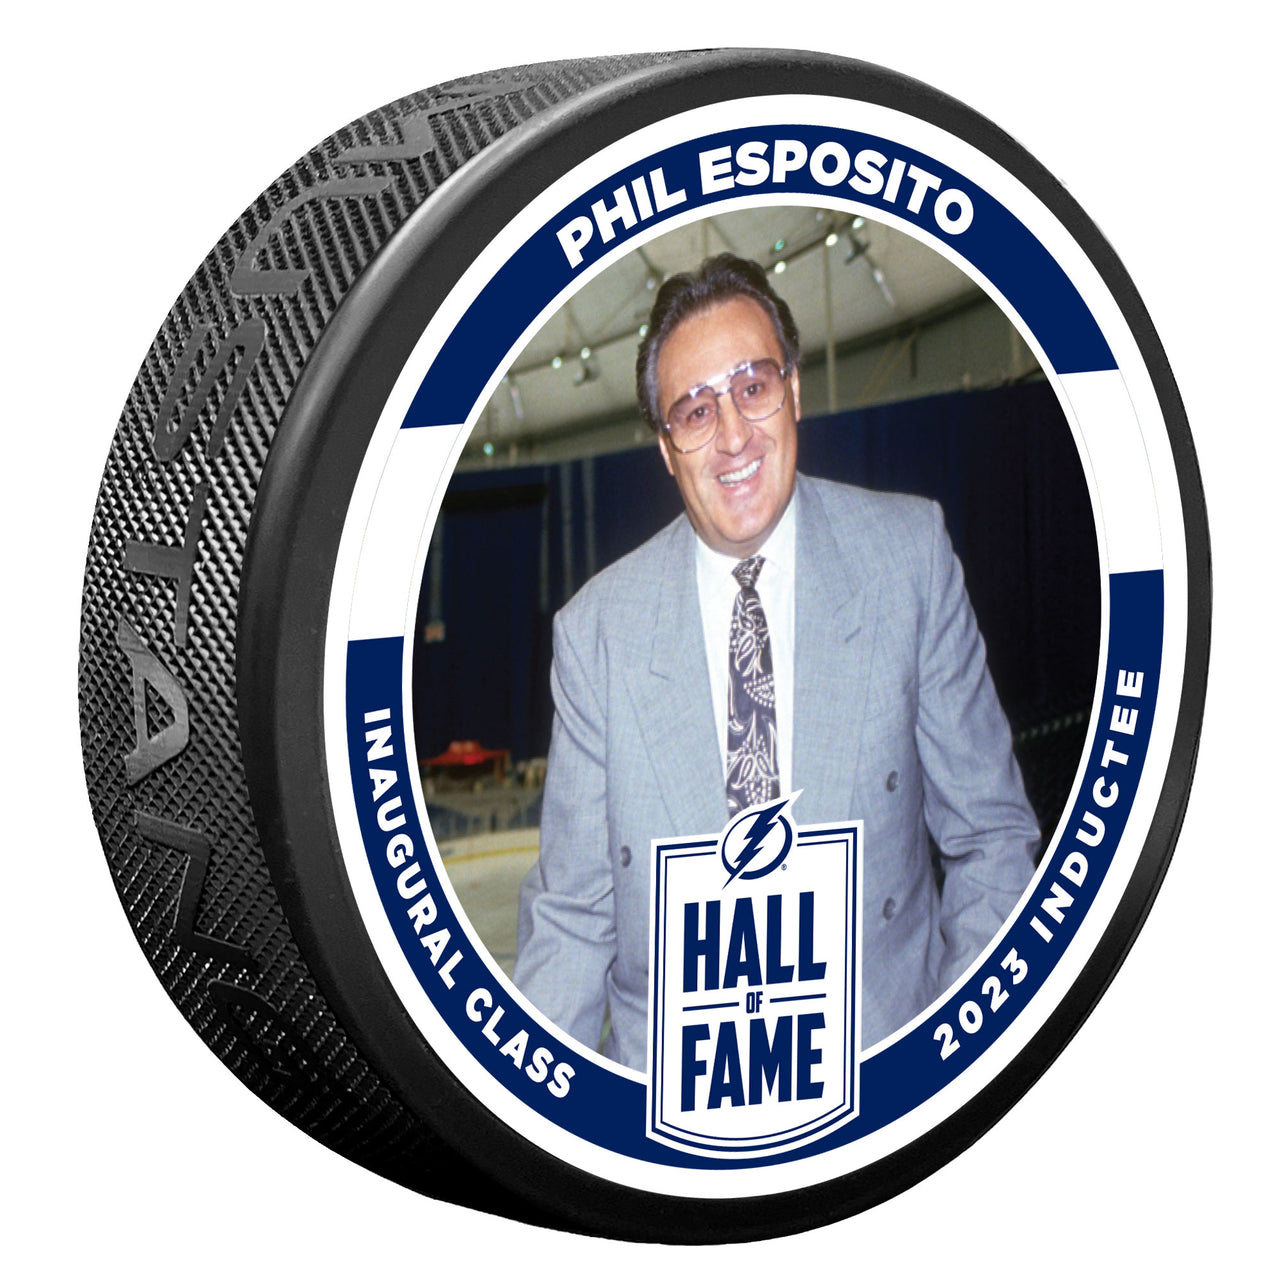 Phil Esposito Lightning Hall of Fame Limited Edition 3D Embossed Puck